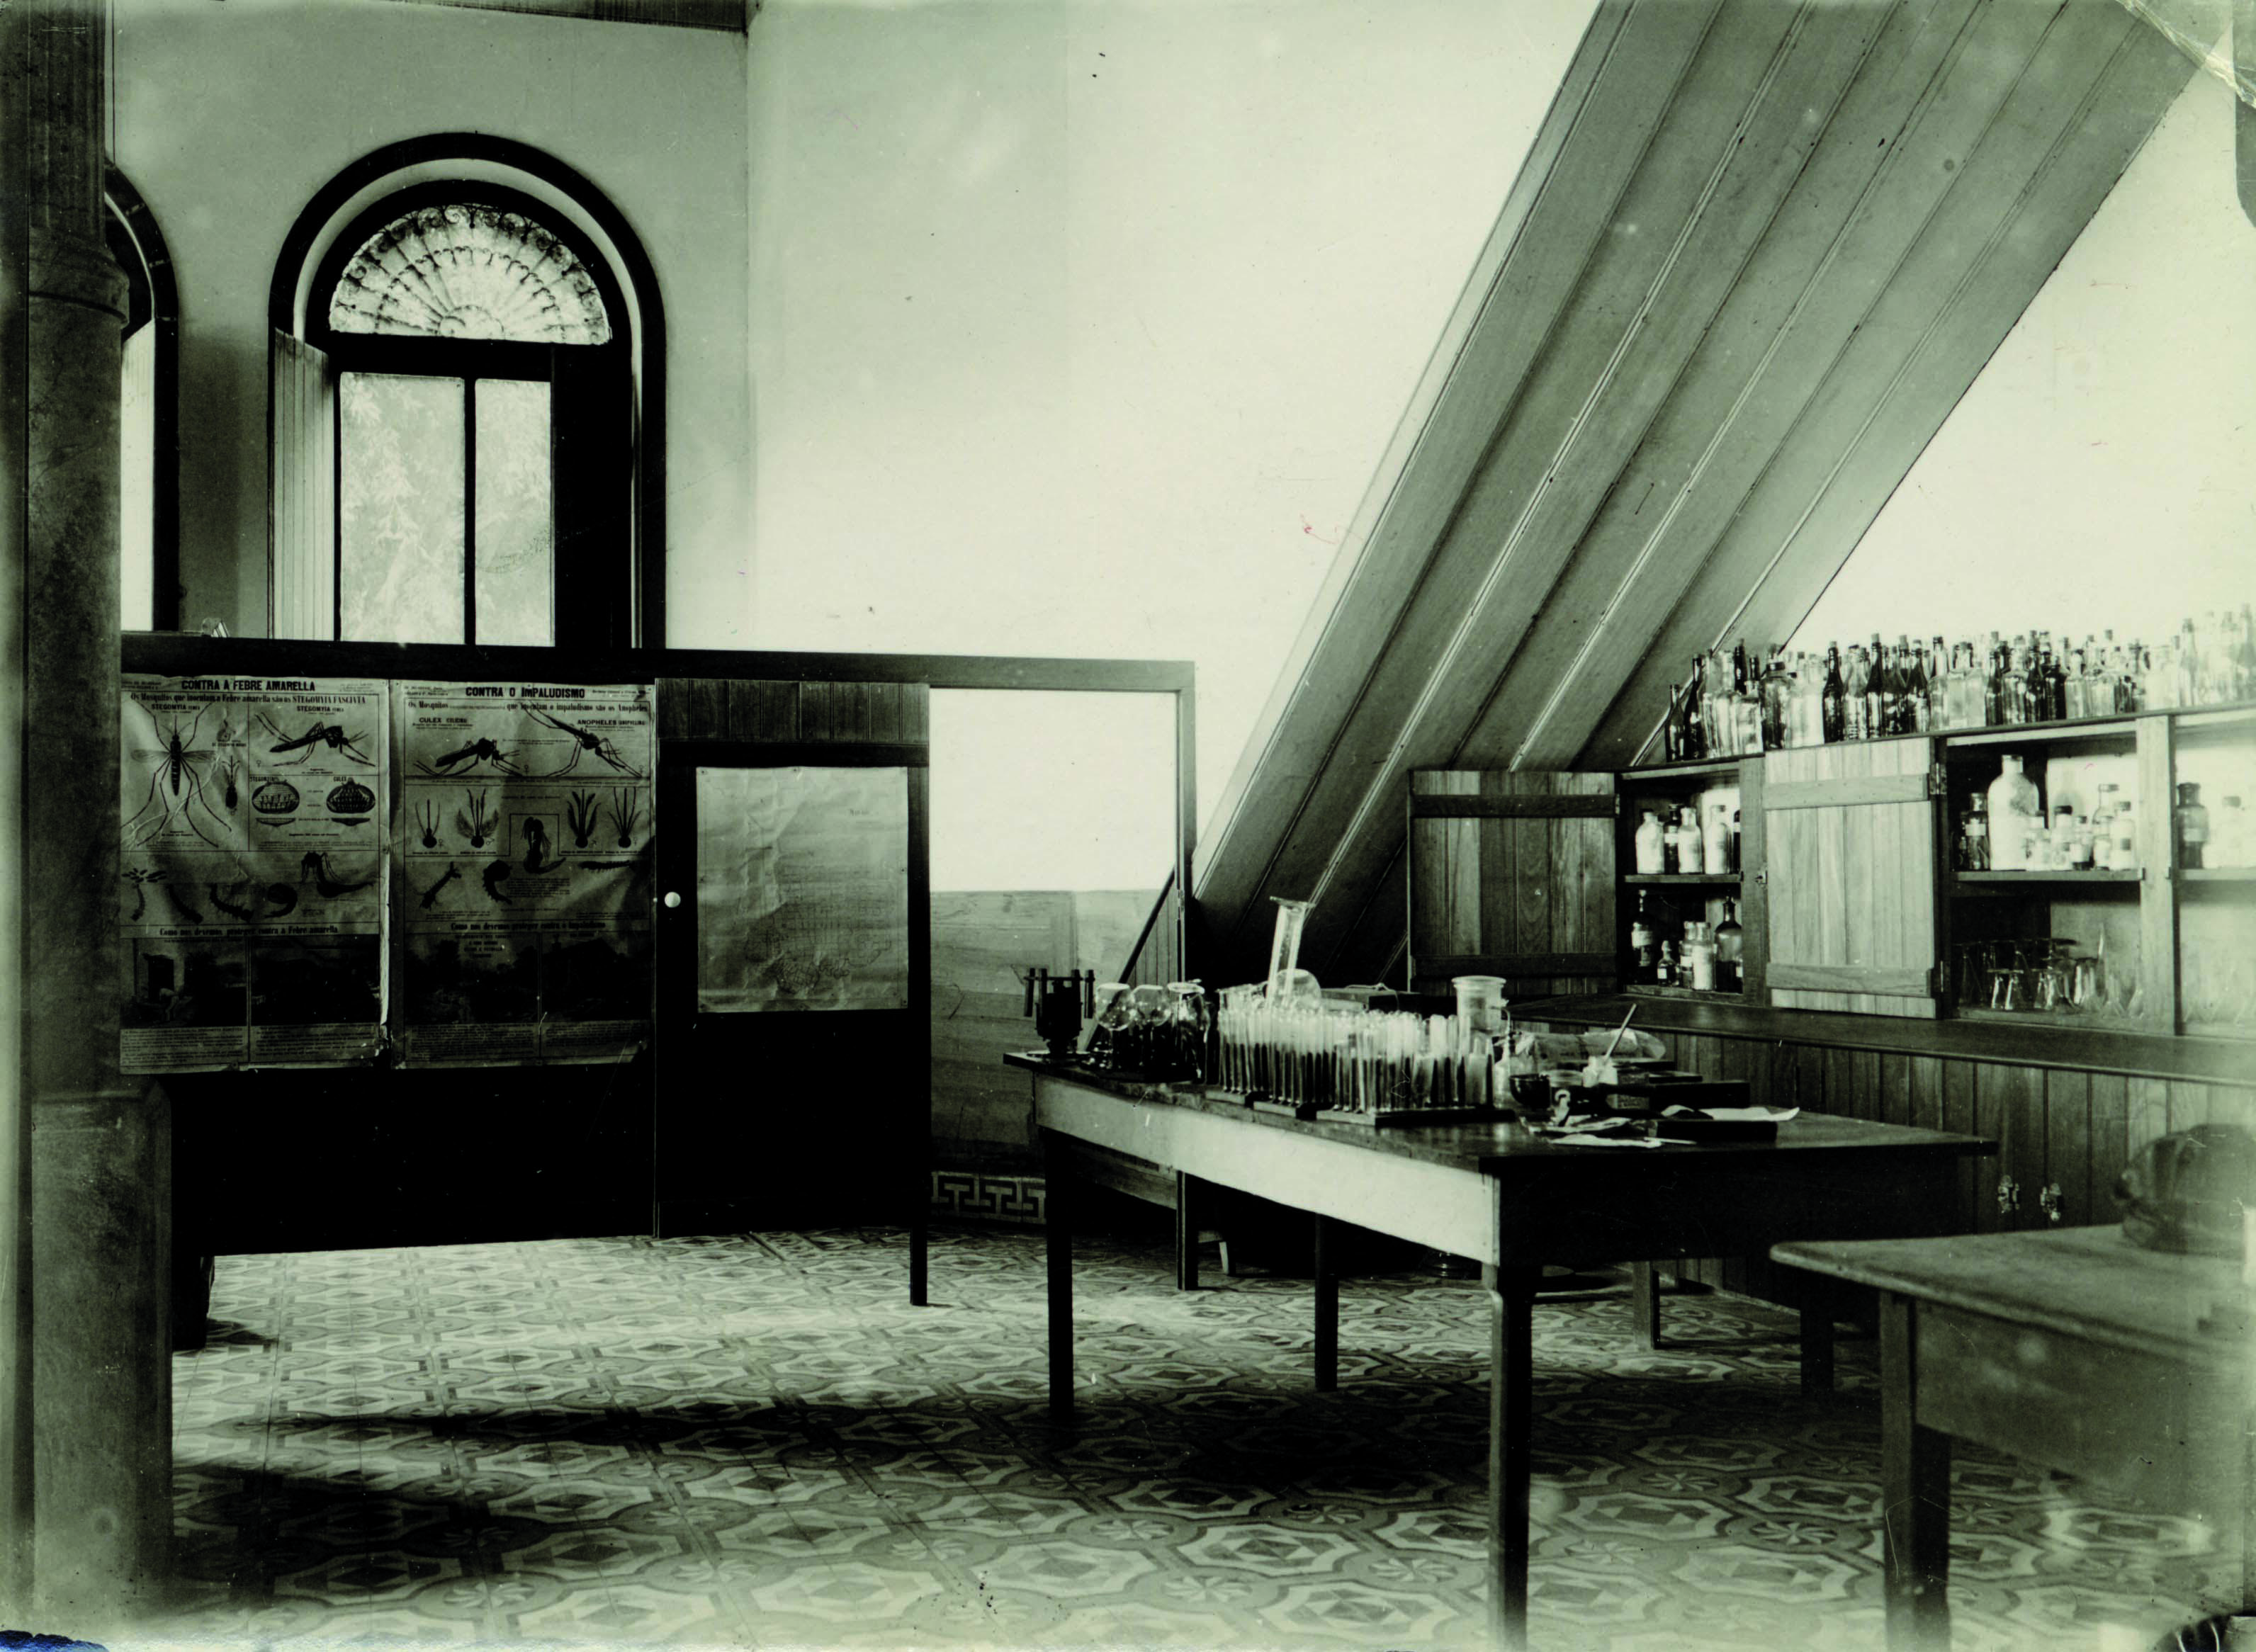 Laboratory interior with posters and a laboratory bench with test tubes